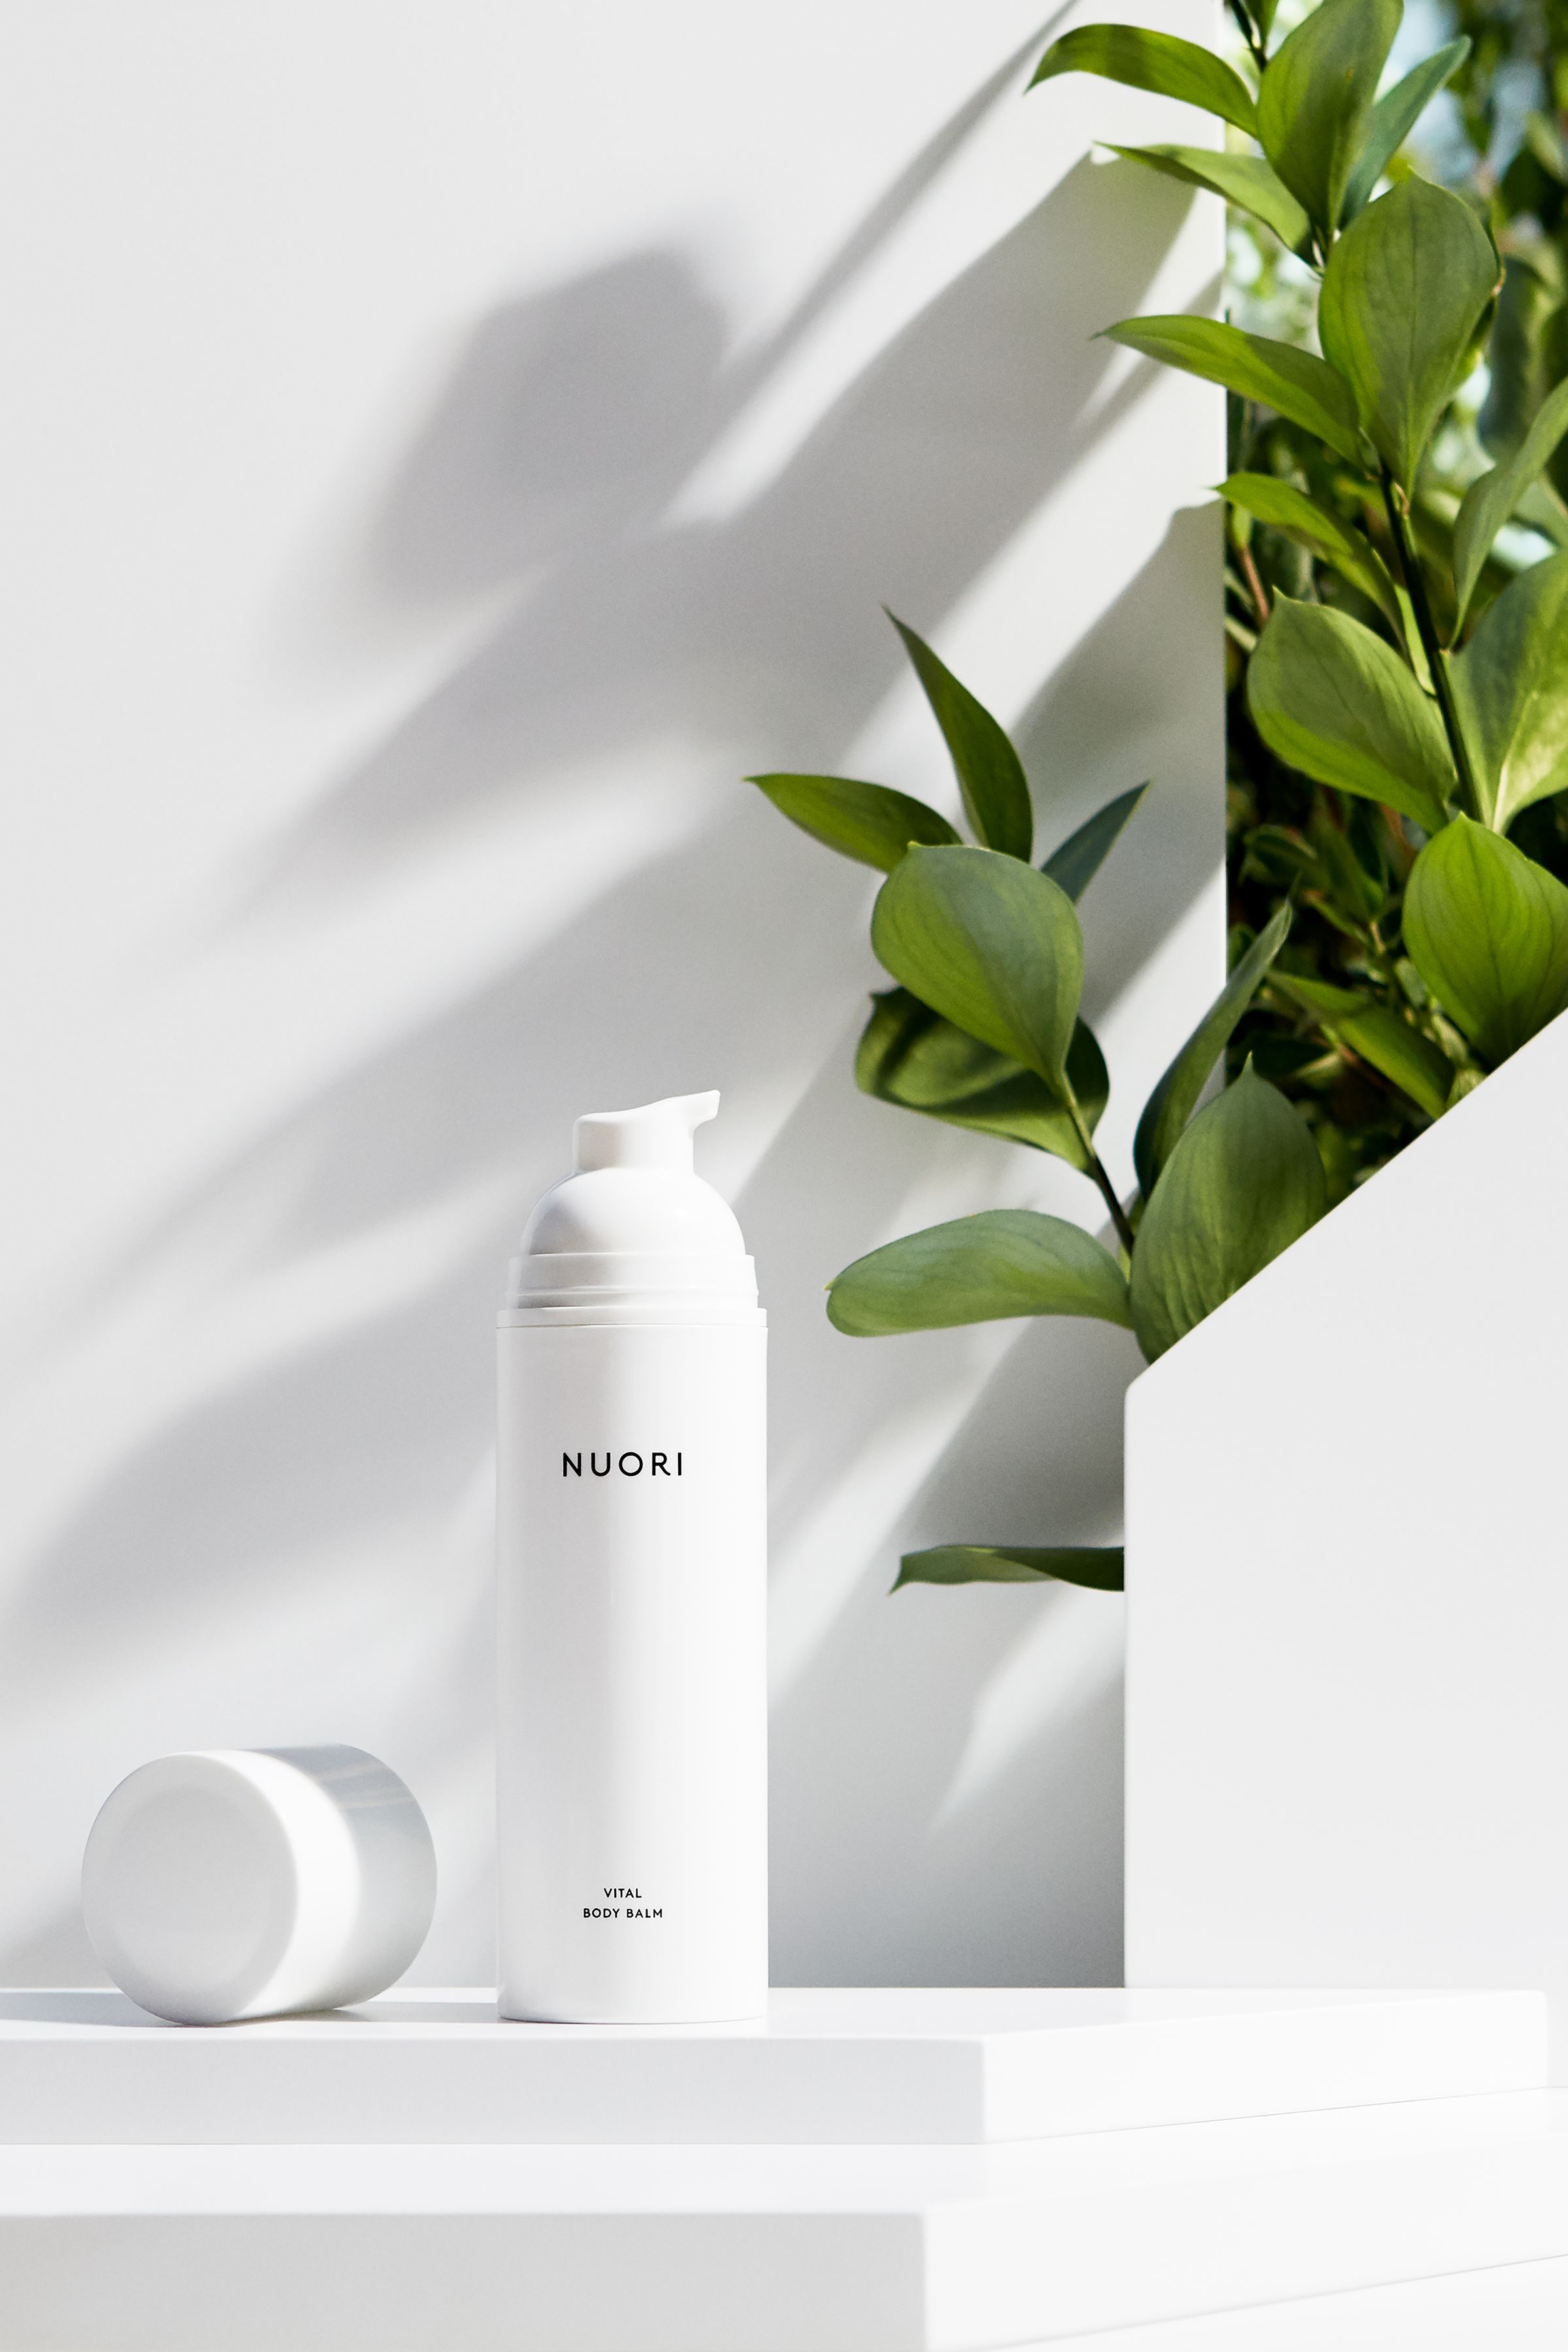 Nuori Vital Body Balm packaging design and still life photography